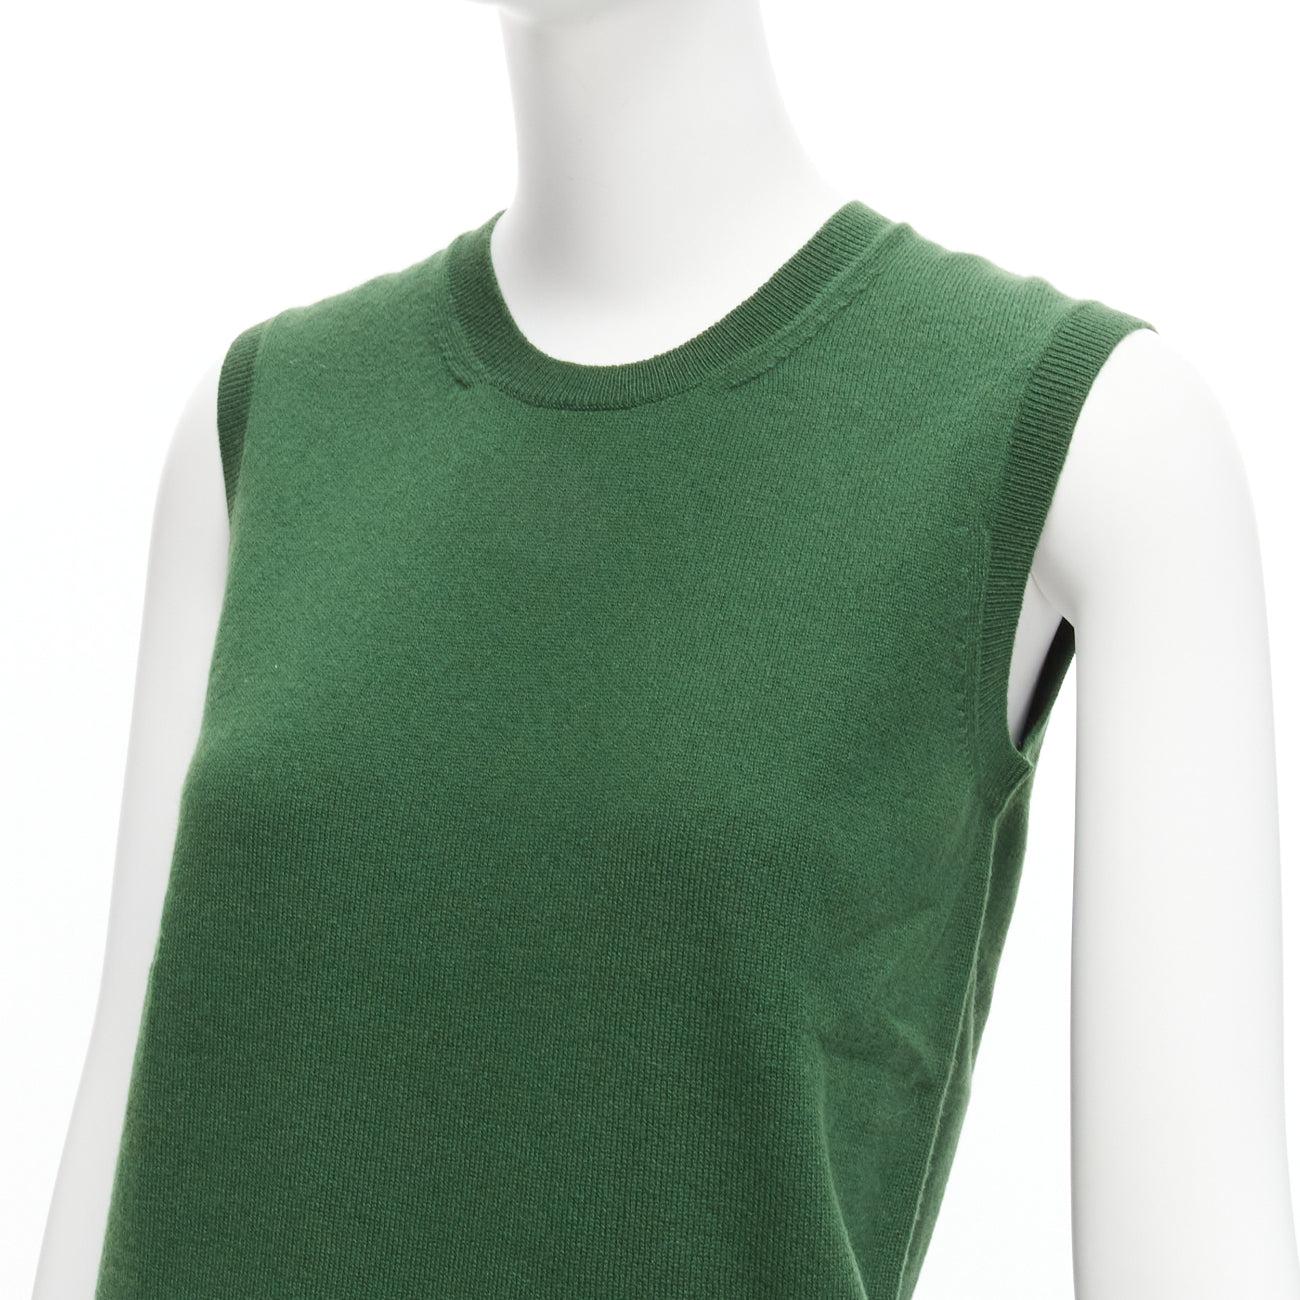 JIL SANDER 100% cashmere forest green crew neck sleeveless sweater vest FR34 XS
Reference: SNKO/A00241
Brand: Jil Sander
Material: Cashmere
Color: Green
Pattern: Solid
Closure: Pullover
Made in: Italy

CONDITION:
Condition: Excellent, this item was